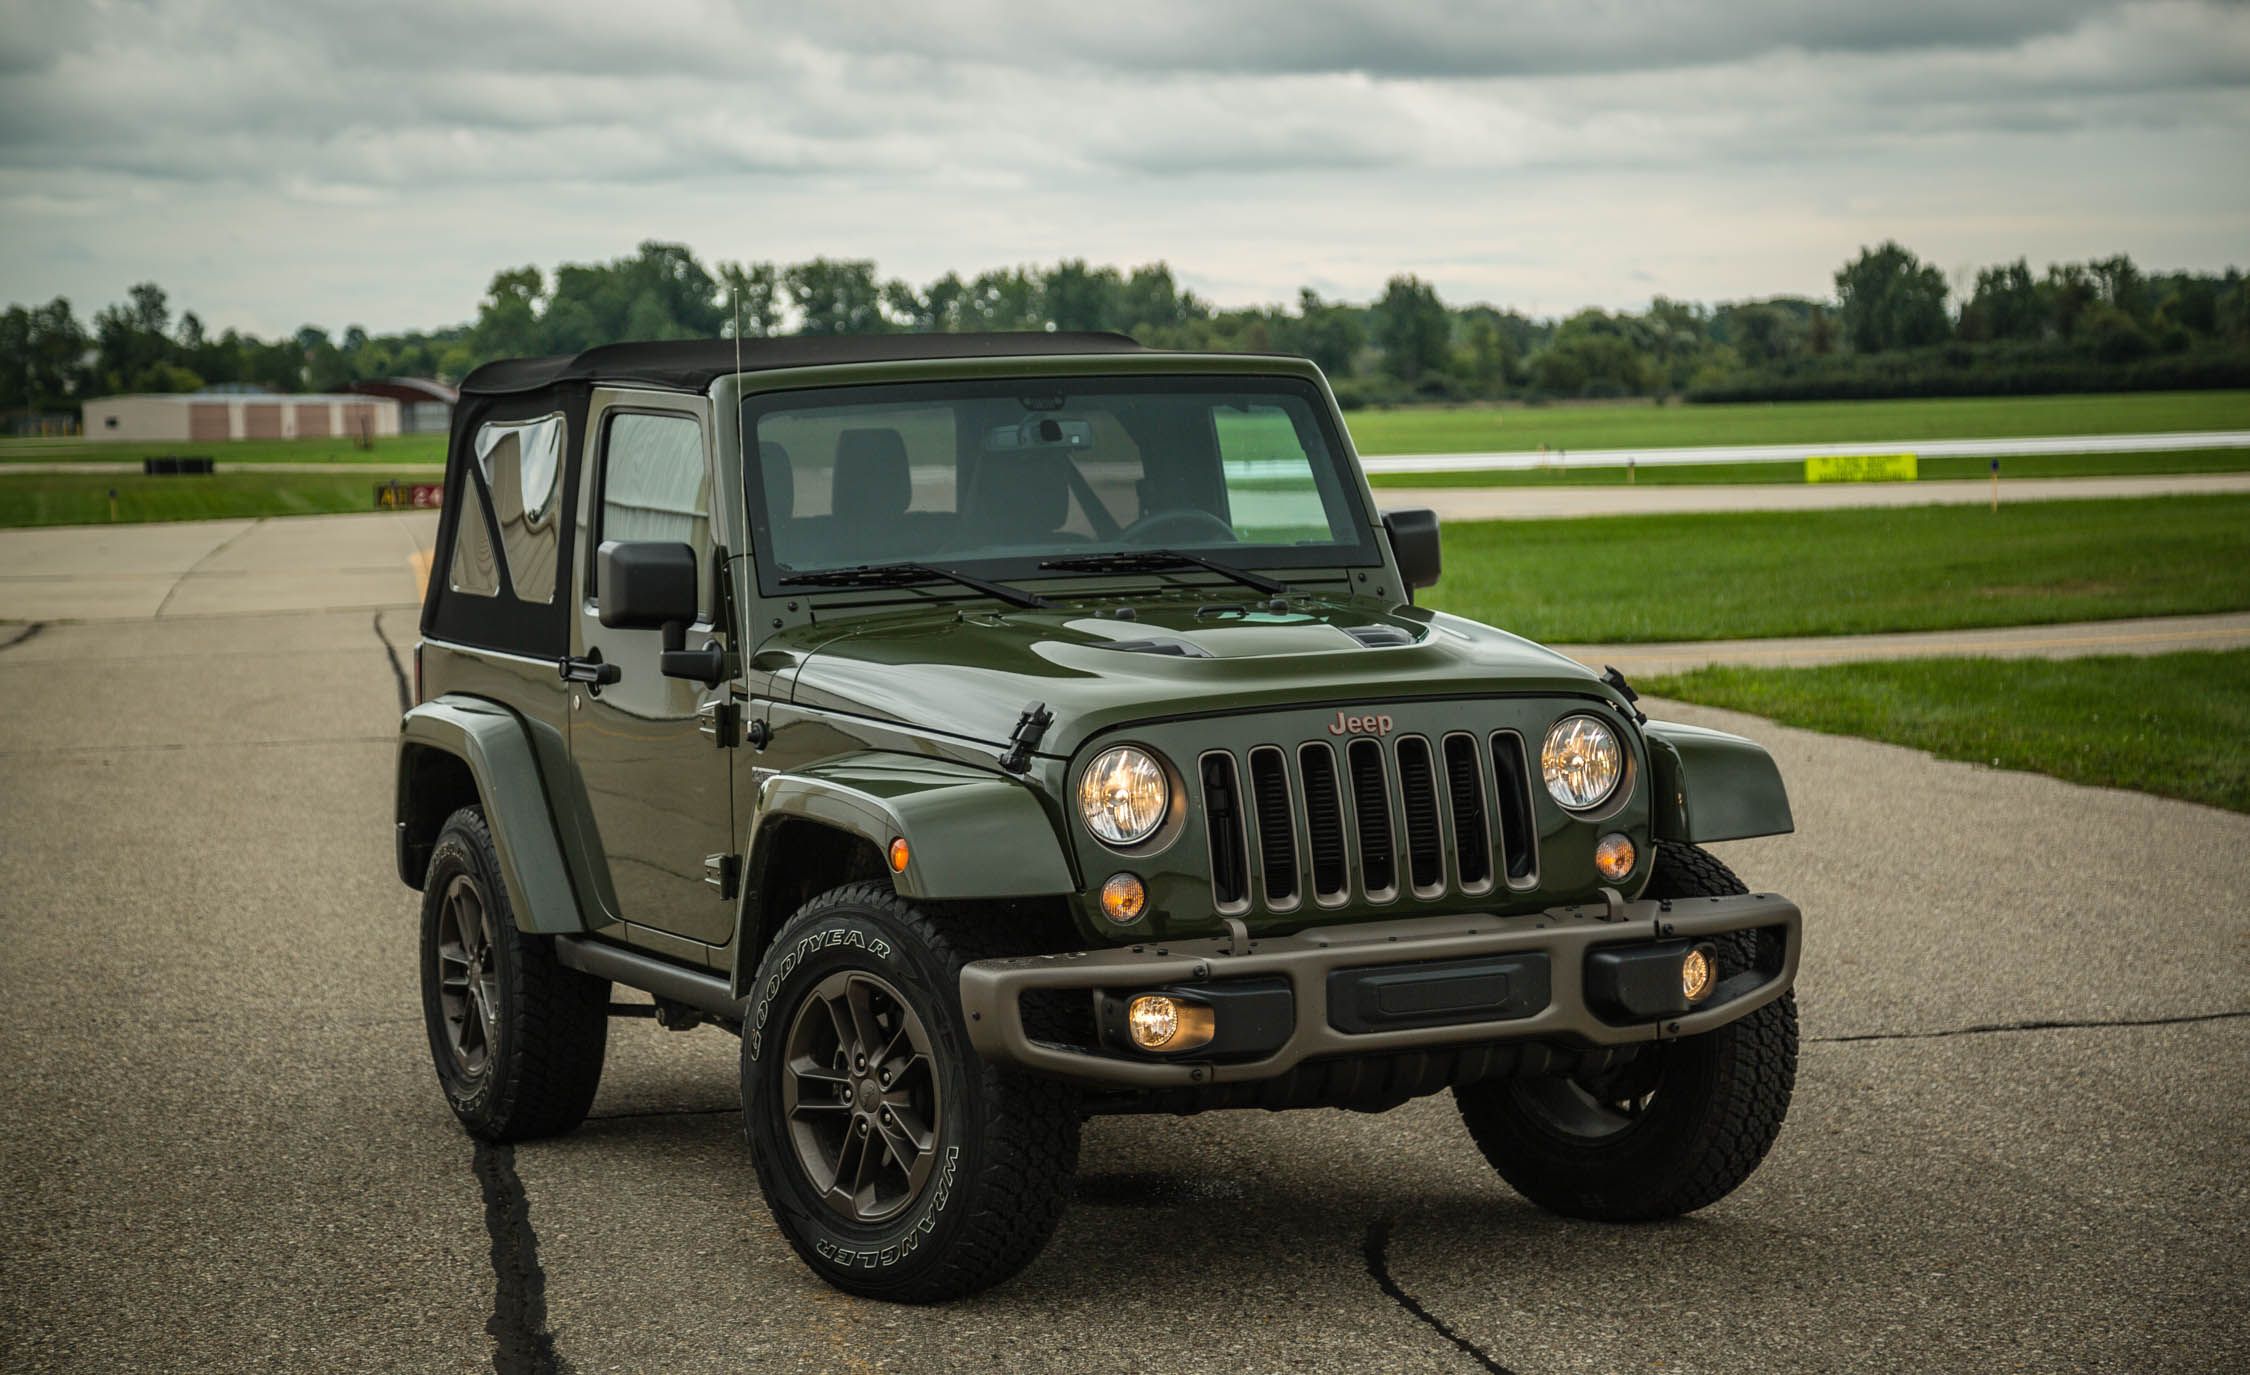 Total 47+ imagen 75th edition jeep wrangler